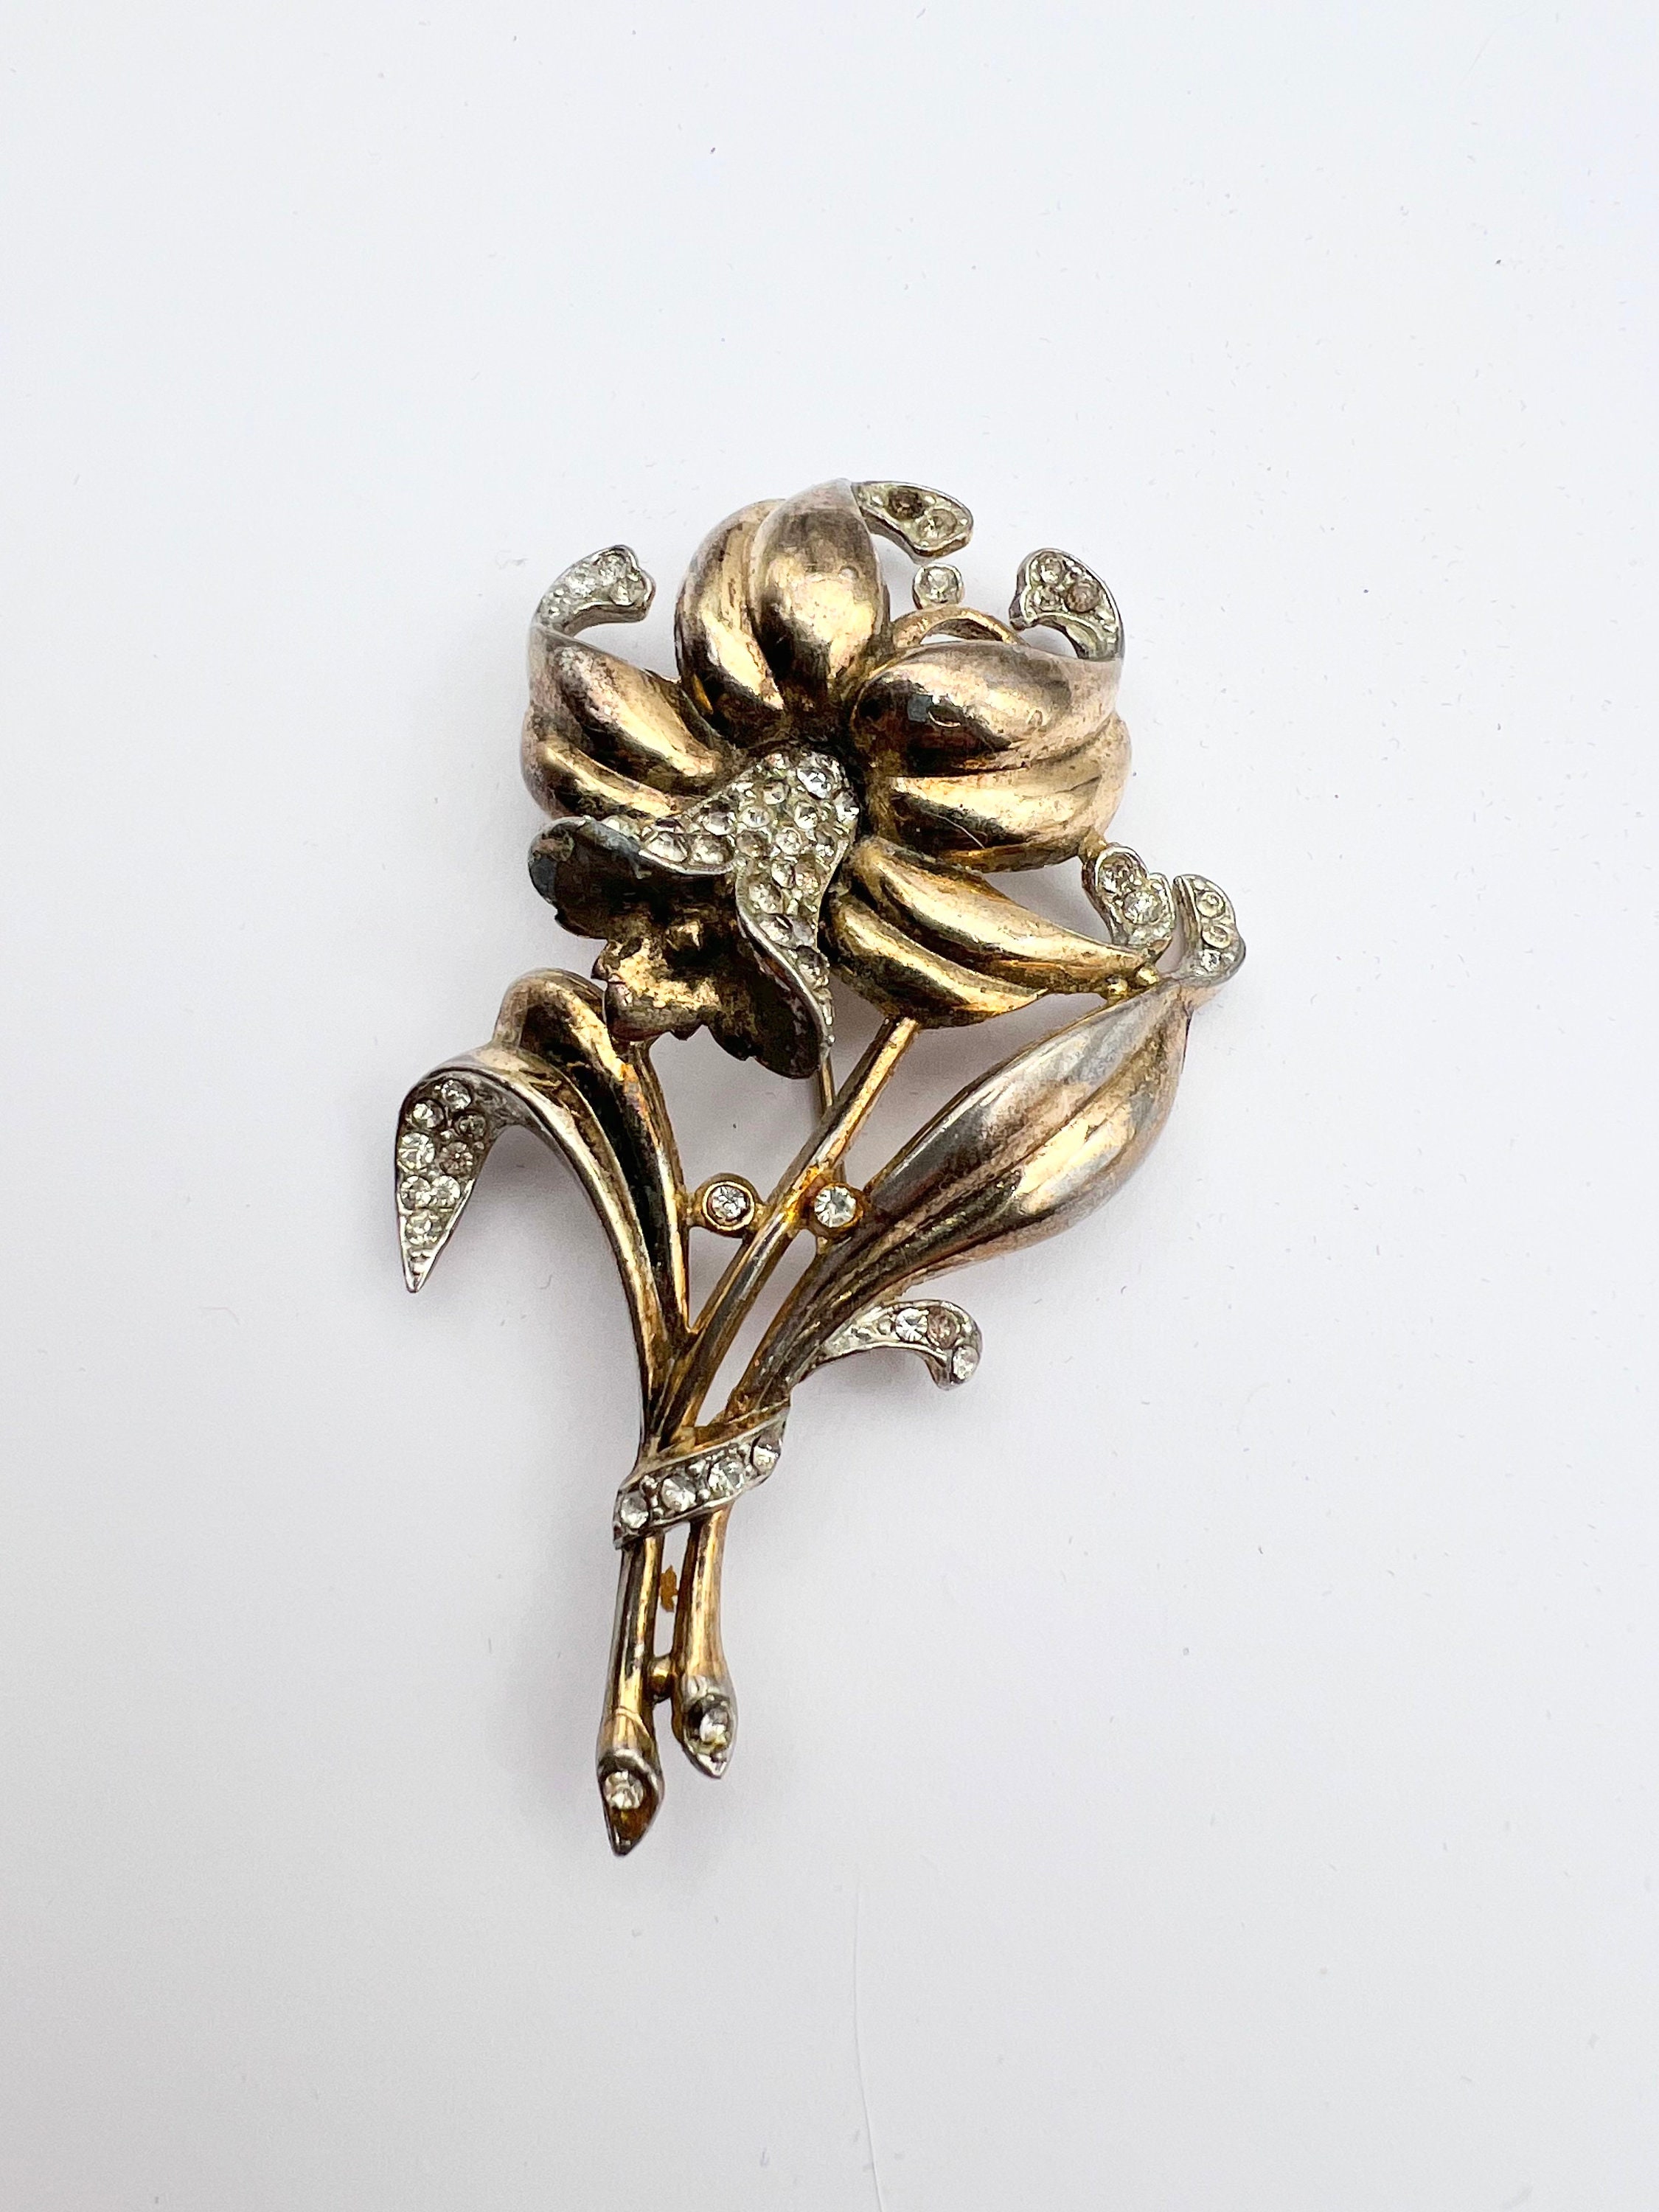 Vintage Crown Trifari Gold Tone Flower Brooch Large 2 5/8 Diameter Floral  Lapel Pin Signed Statement Jewelry for Women or Men